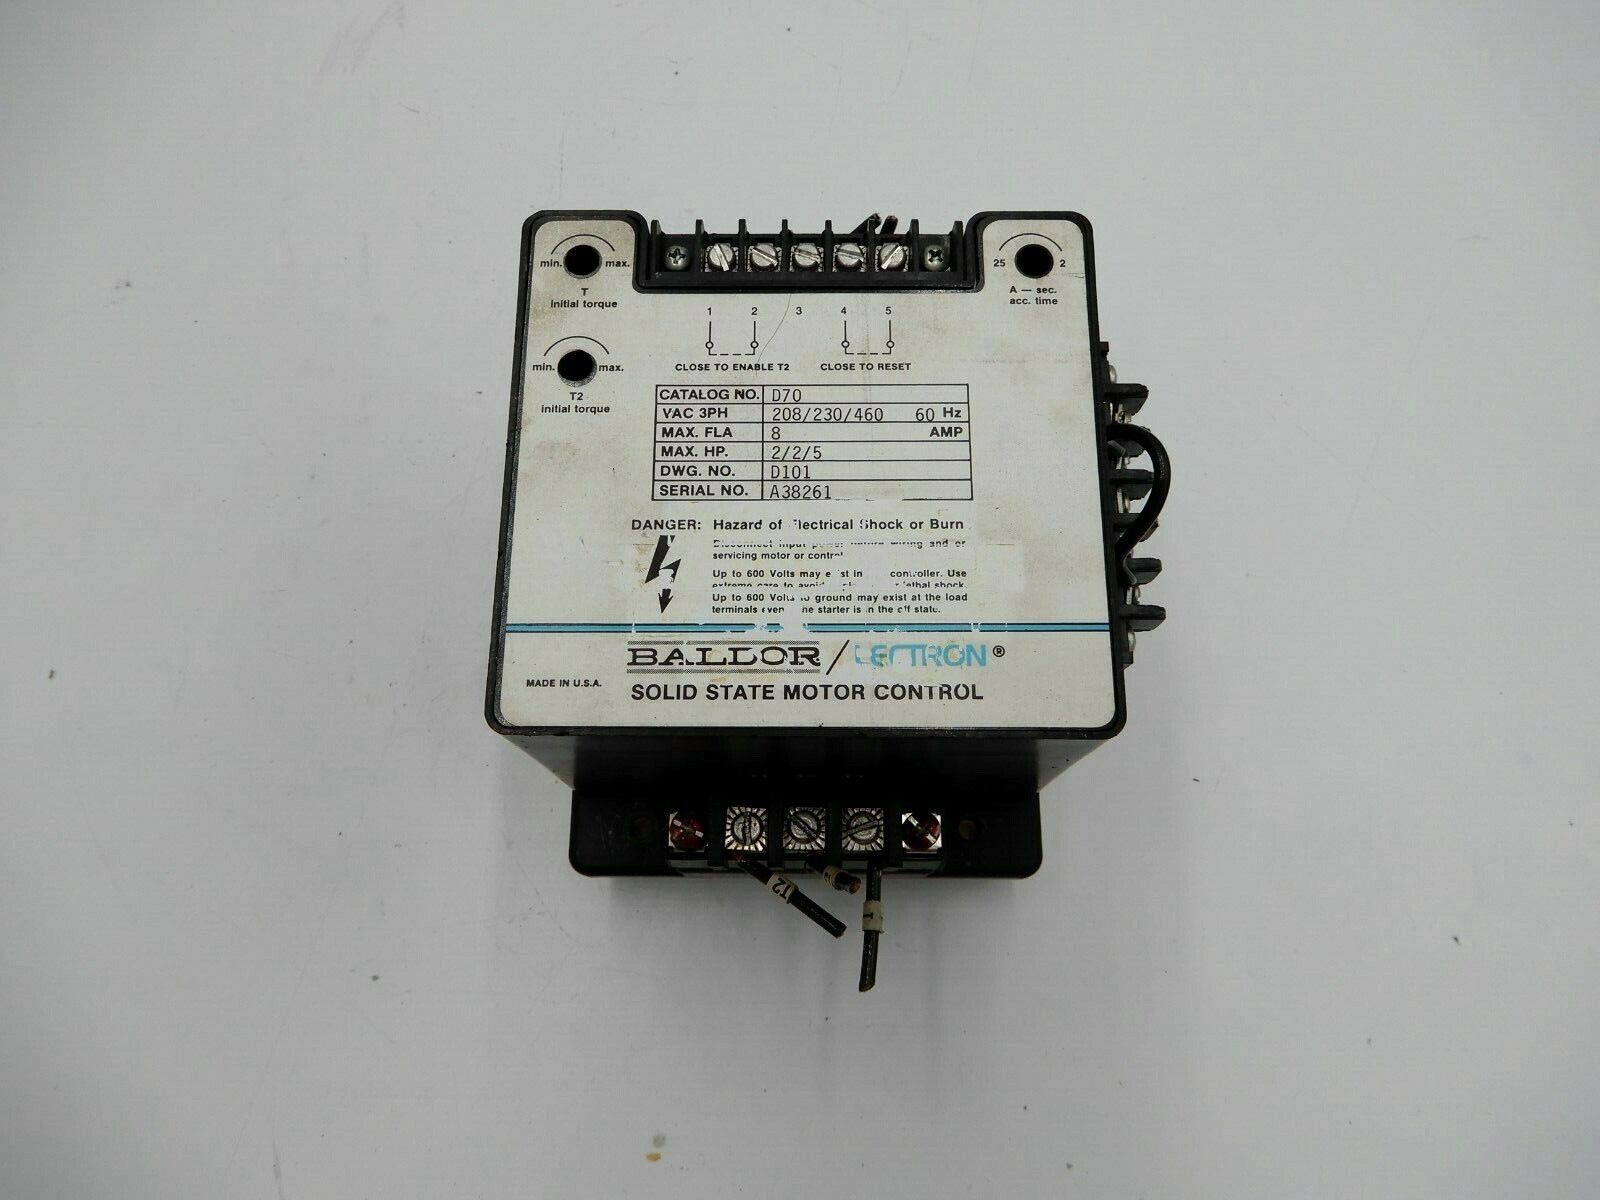 BALDOR/LECTRON D70 SOLID STATE MOTOR CONTROL STOCK 745